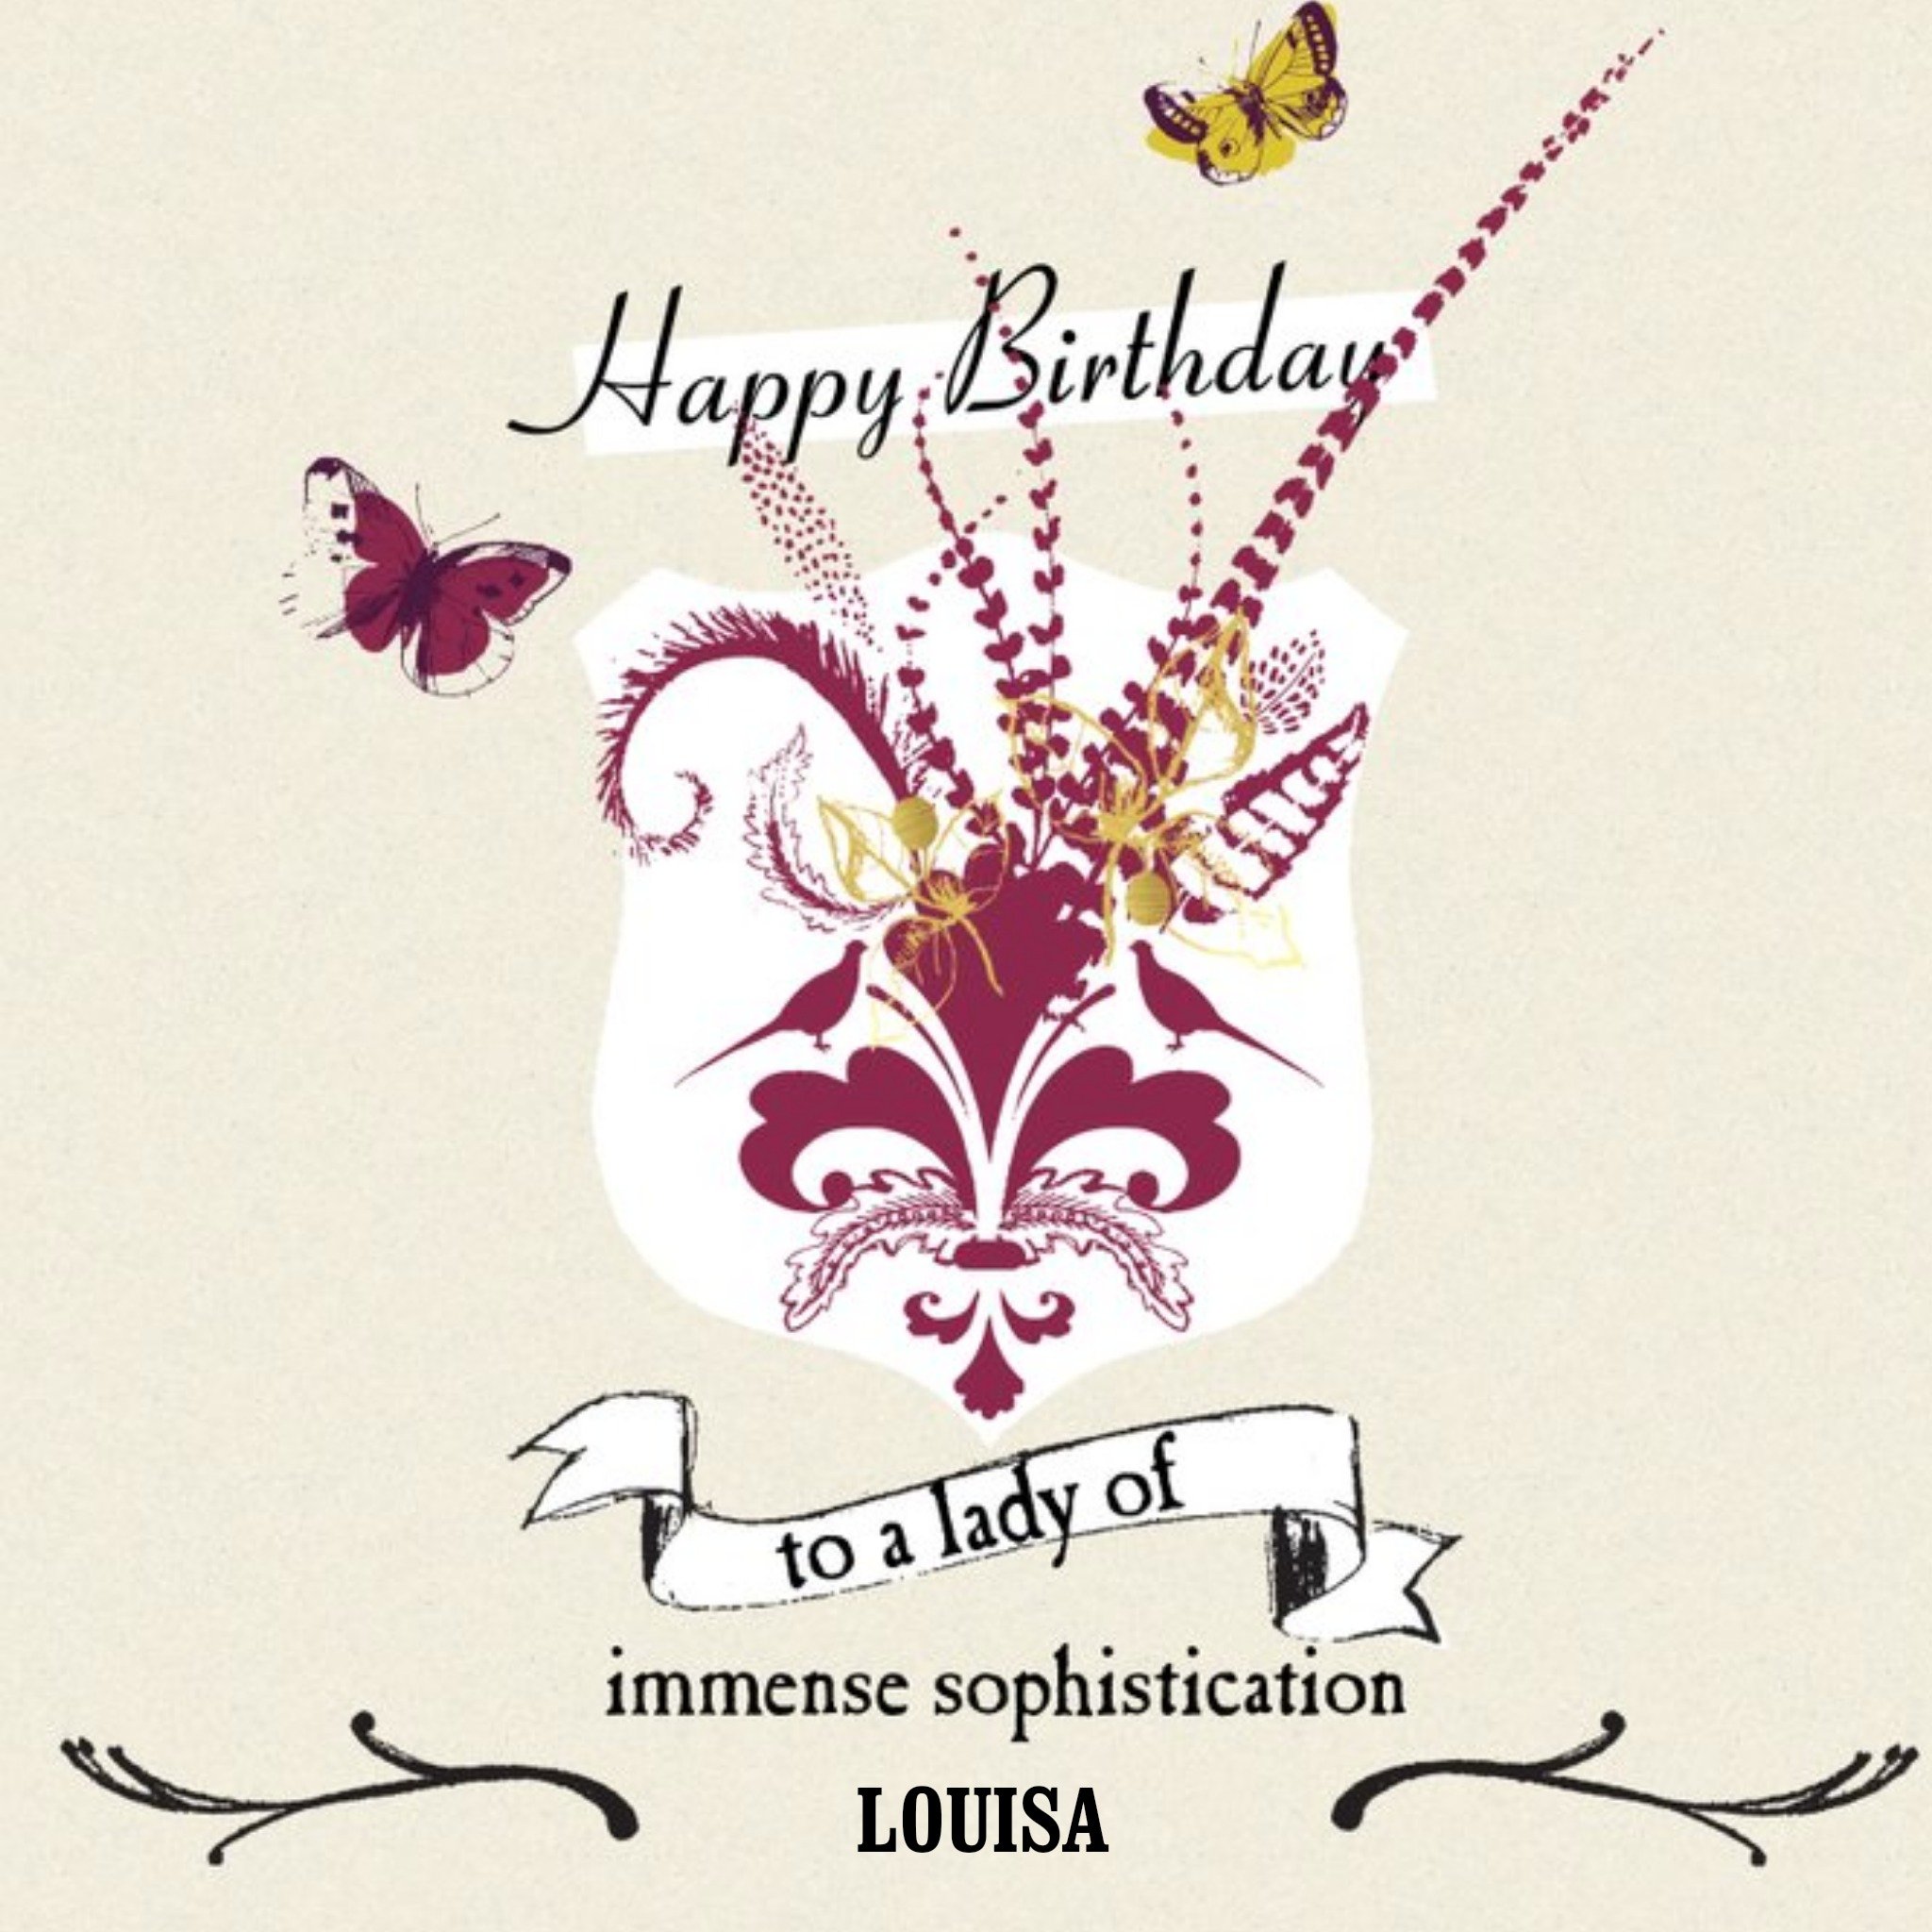 Moonpig To A Lady Of Immense Sophistication Personalised Happy Birthday Card, Square